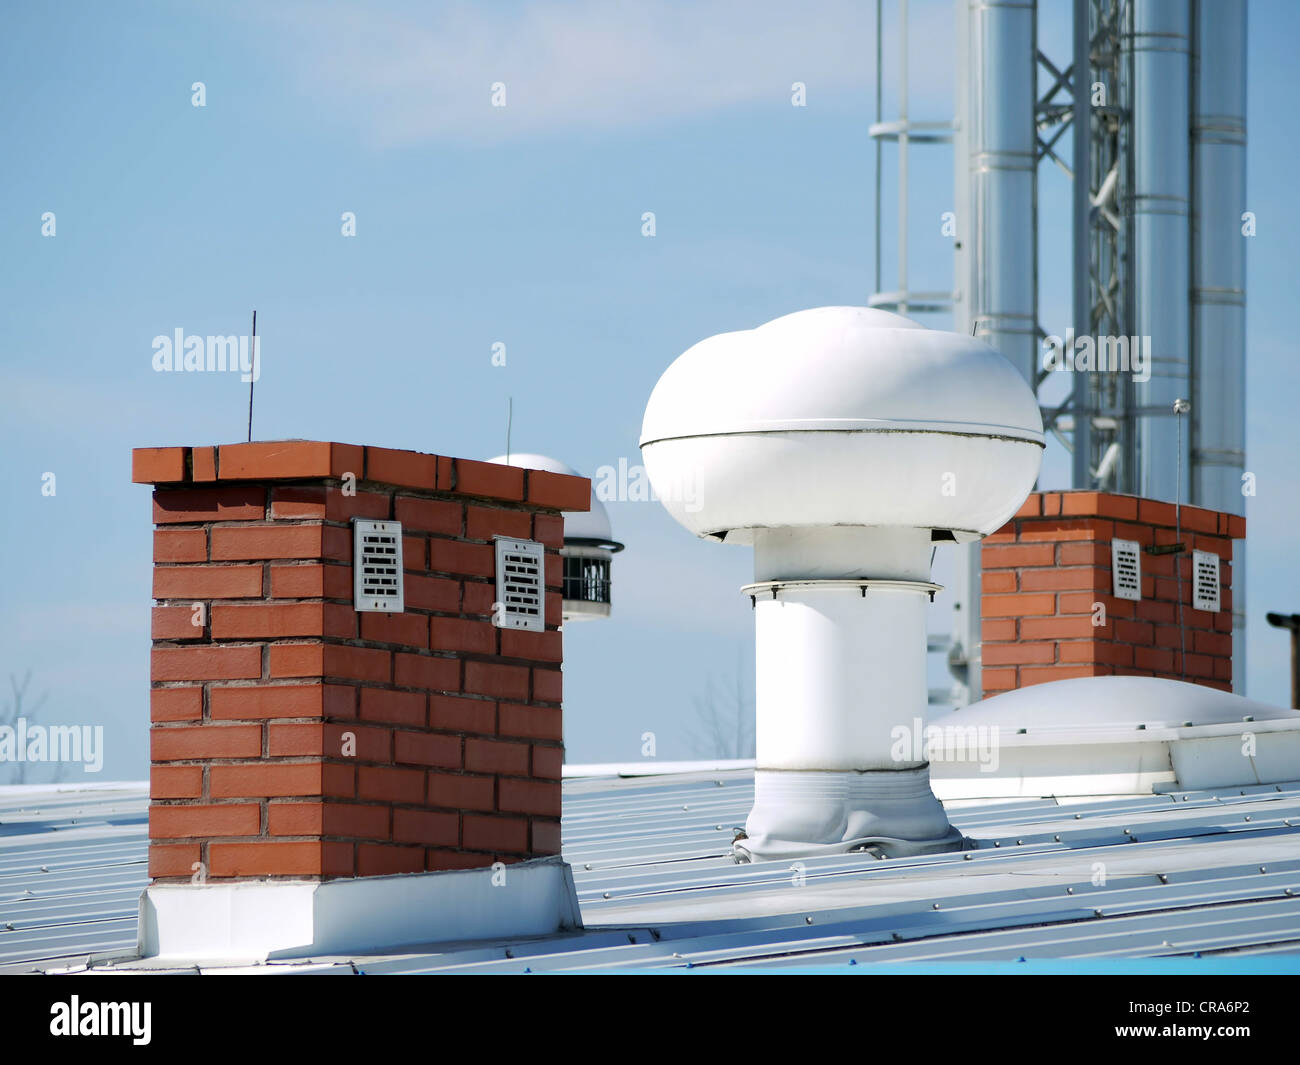 Plant roof with various outlets and chimneys Stock Photo